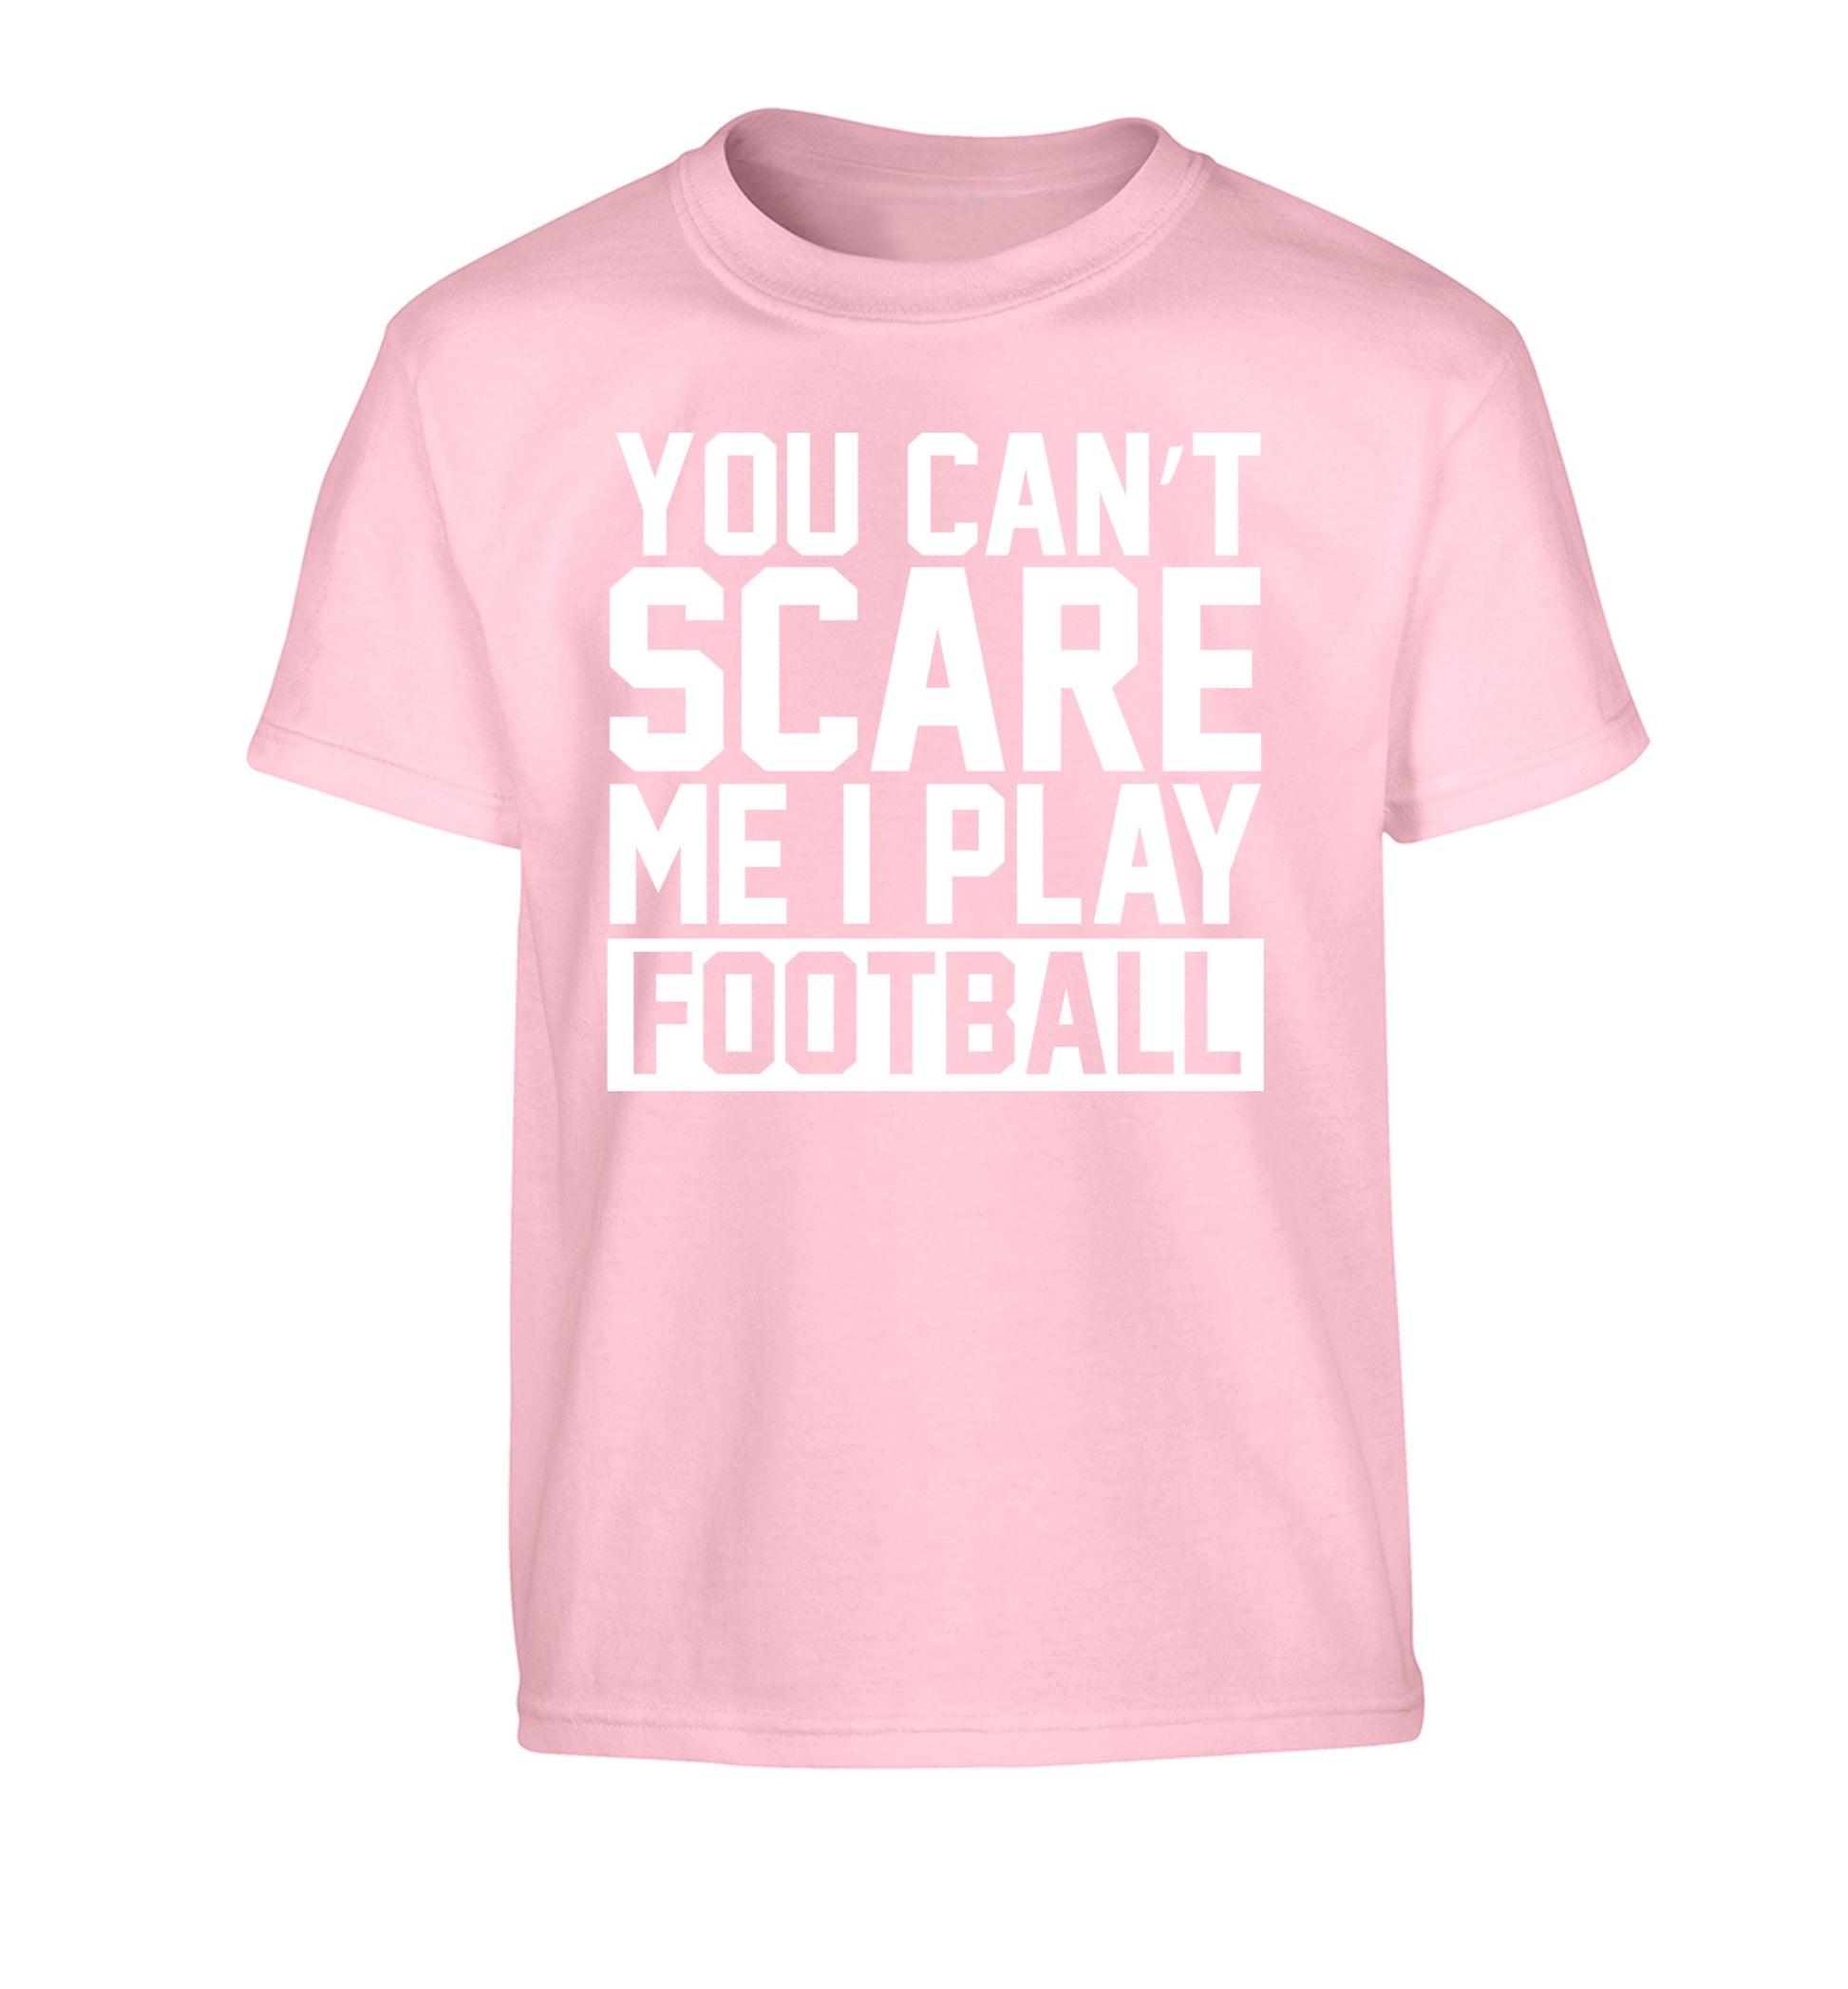 You can't scare me I play football Children's light pink Tshirt 12-14 Years